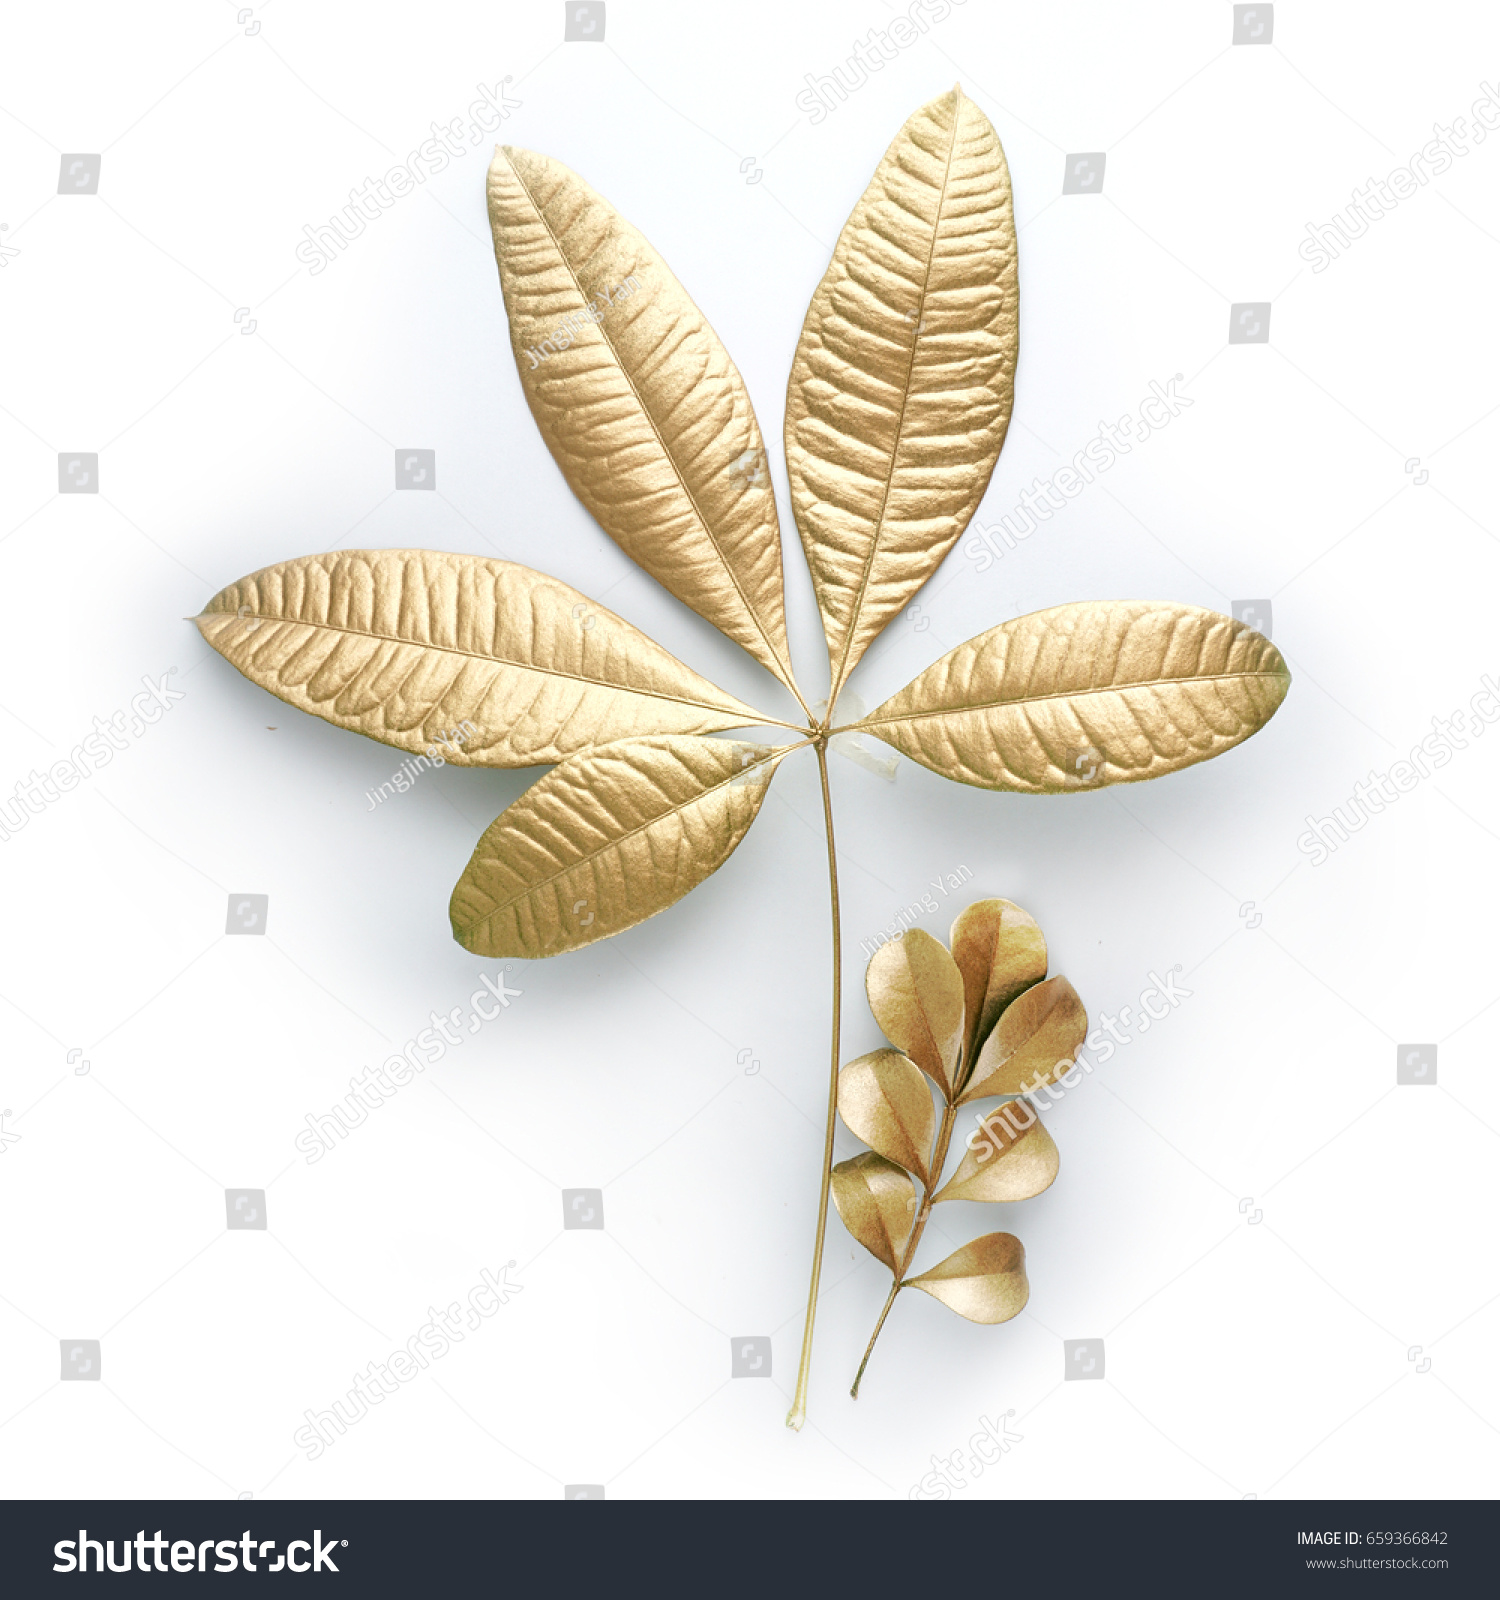 golden  leaf design elements. Decoration elements for invitation, wedding cards, valentines day, greeting cards. Isolated. #659366842